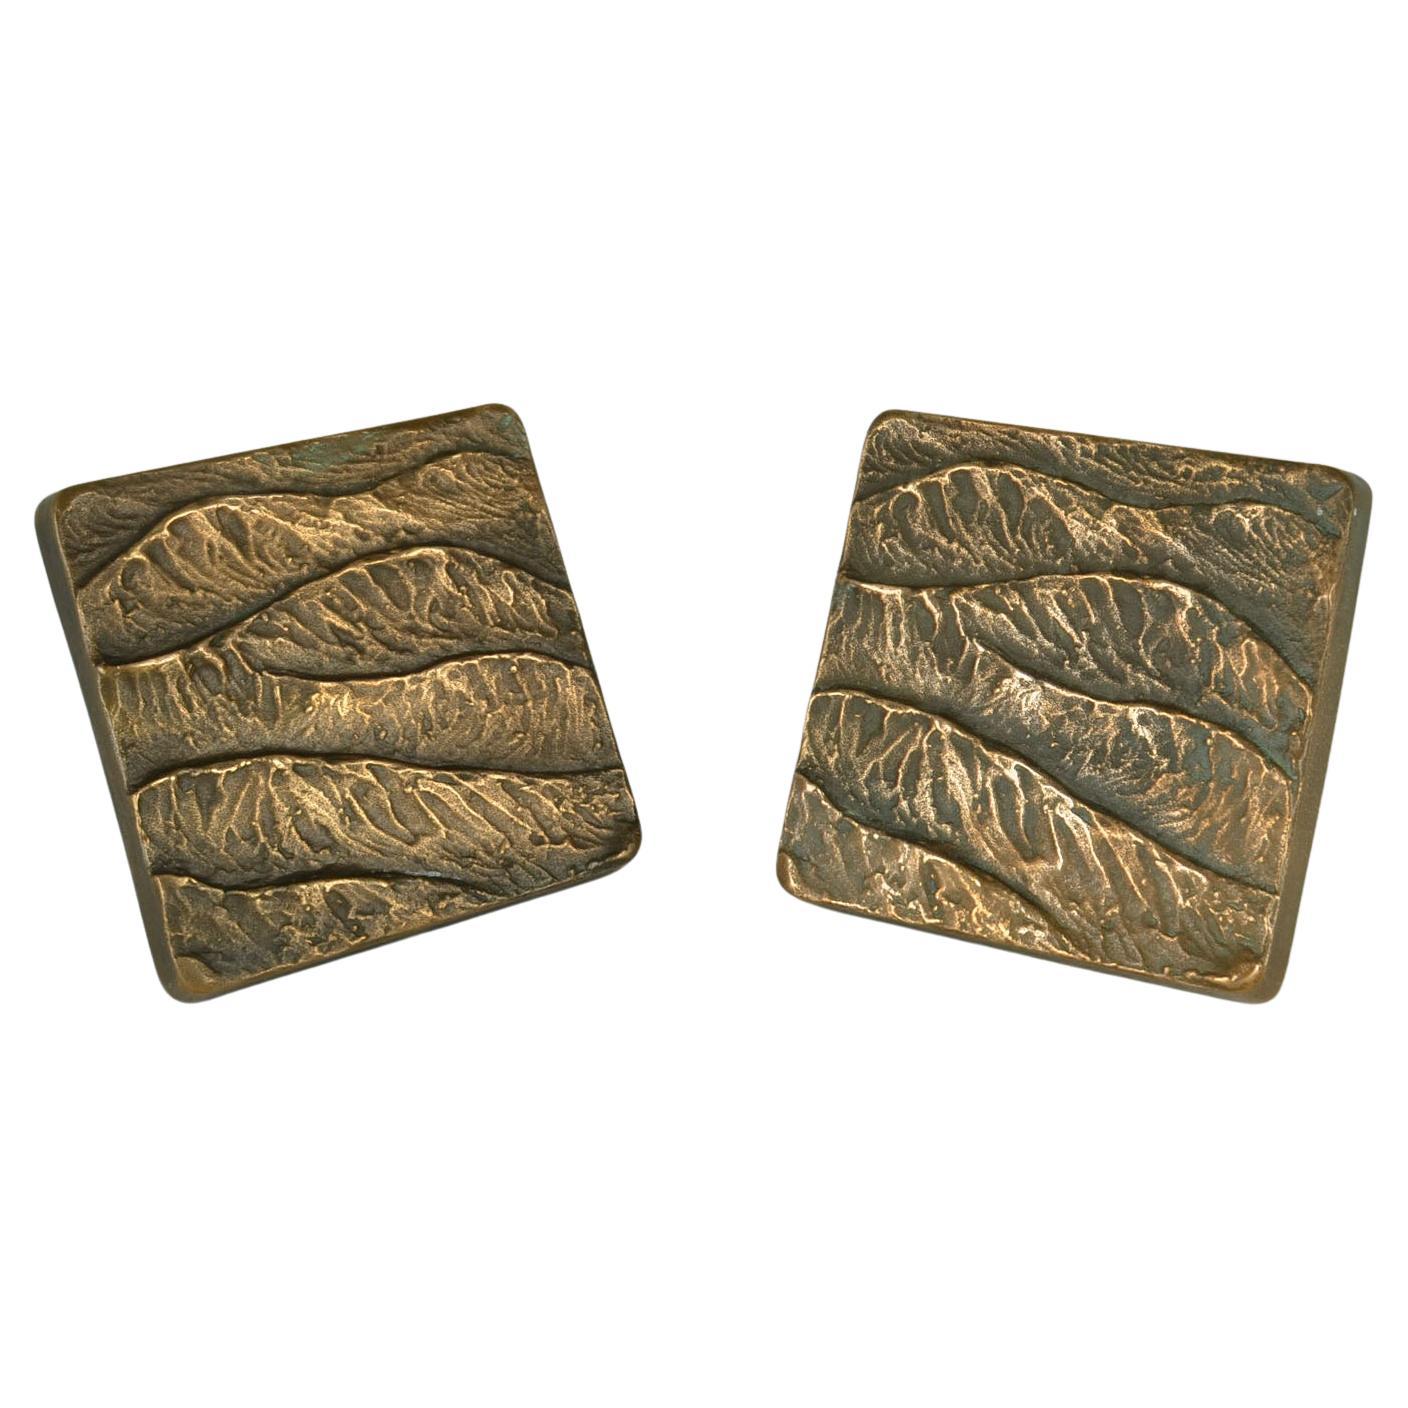 Two square cast bronze door handle, letter box and key holder with surface with strong relief like the waves.
These identical handles can be applied inside or outside on a pair of double doors next to each other or on a single door on opposite